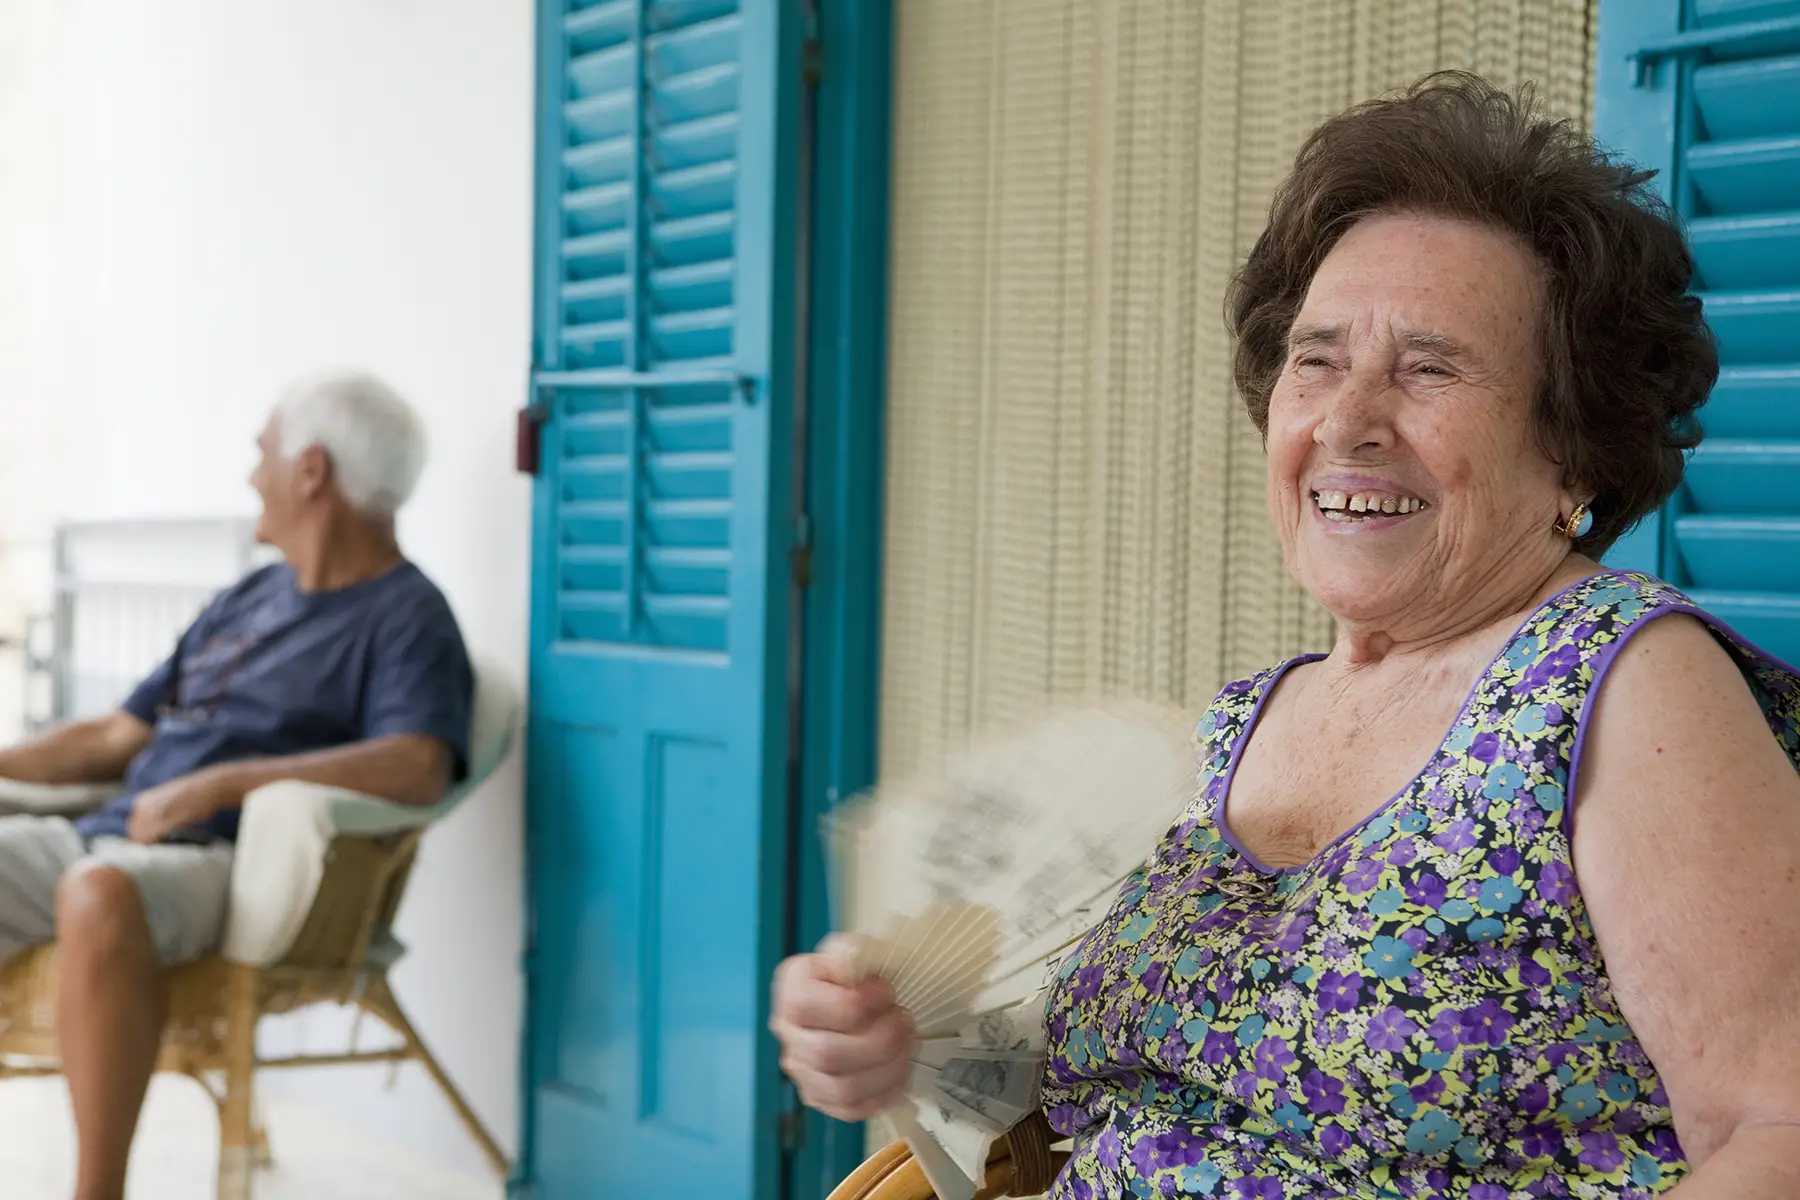 Older woman, laughing and fanning herself, older man sitting in background outside